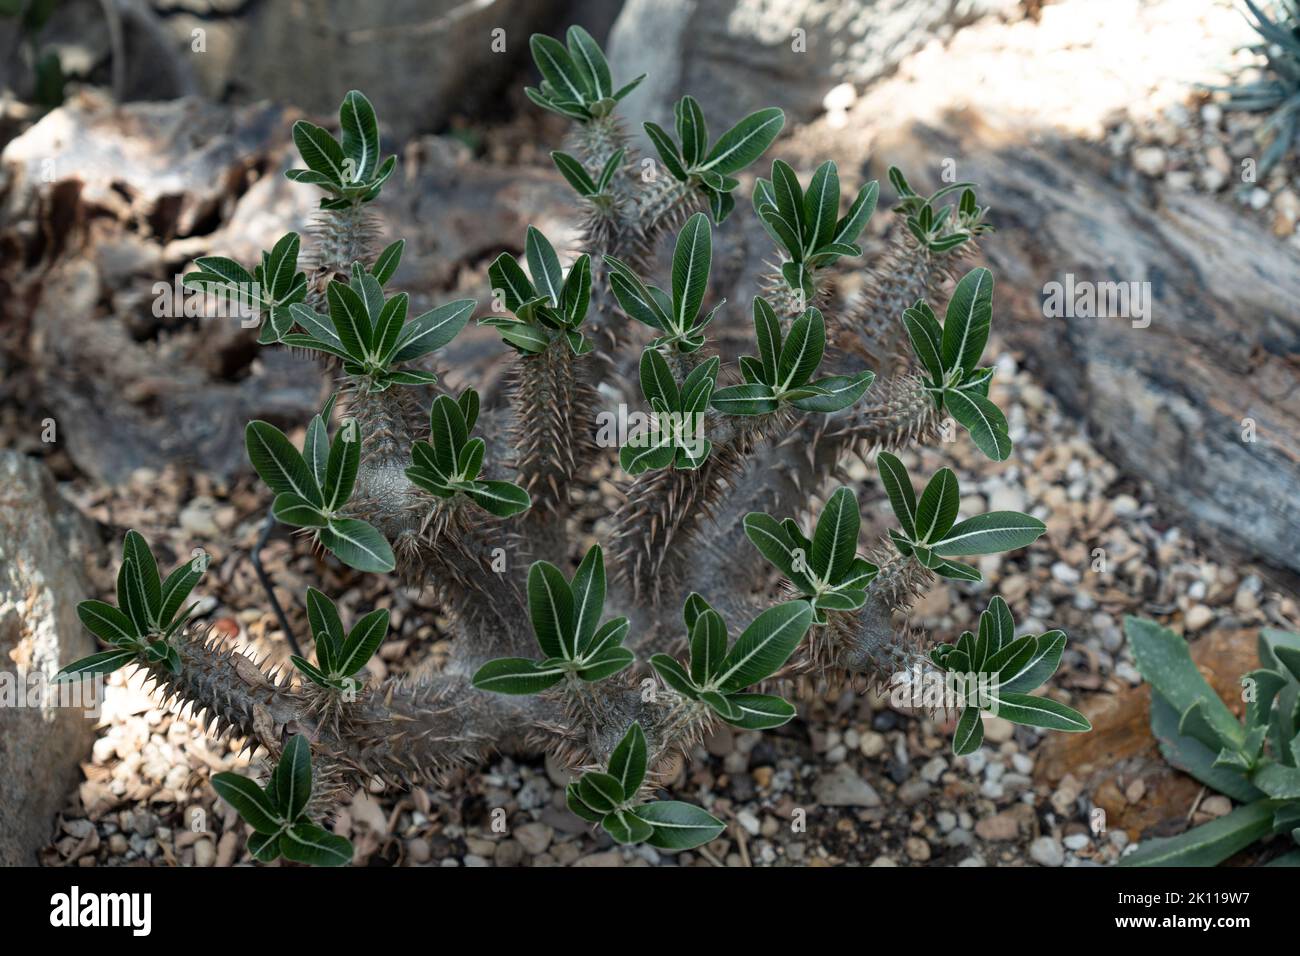 Pachypodium densiflorum. Plant with leaves and sharp thorns native to Madagascar environment Stock Photo